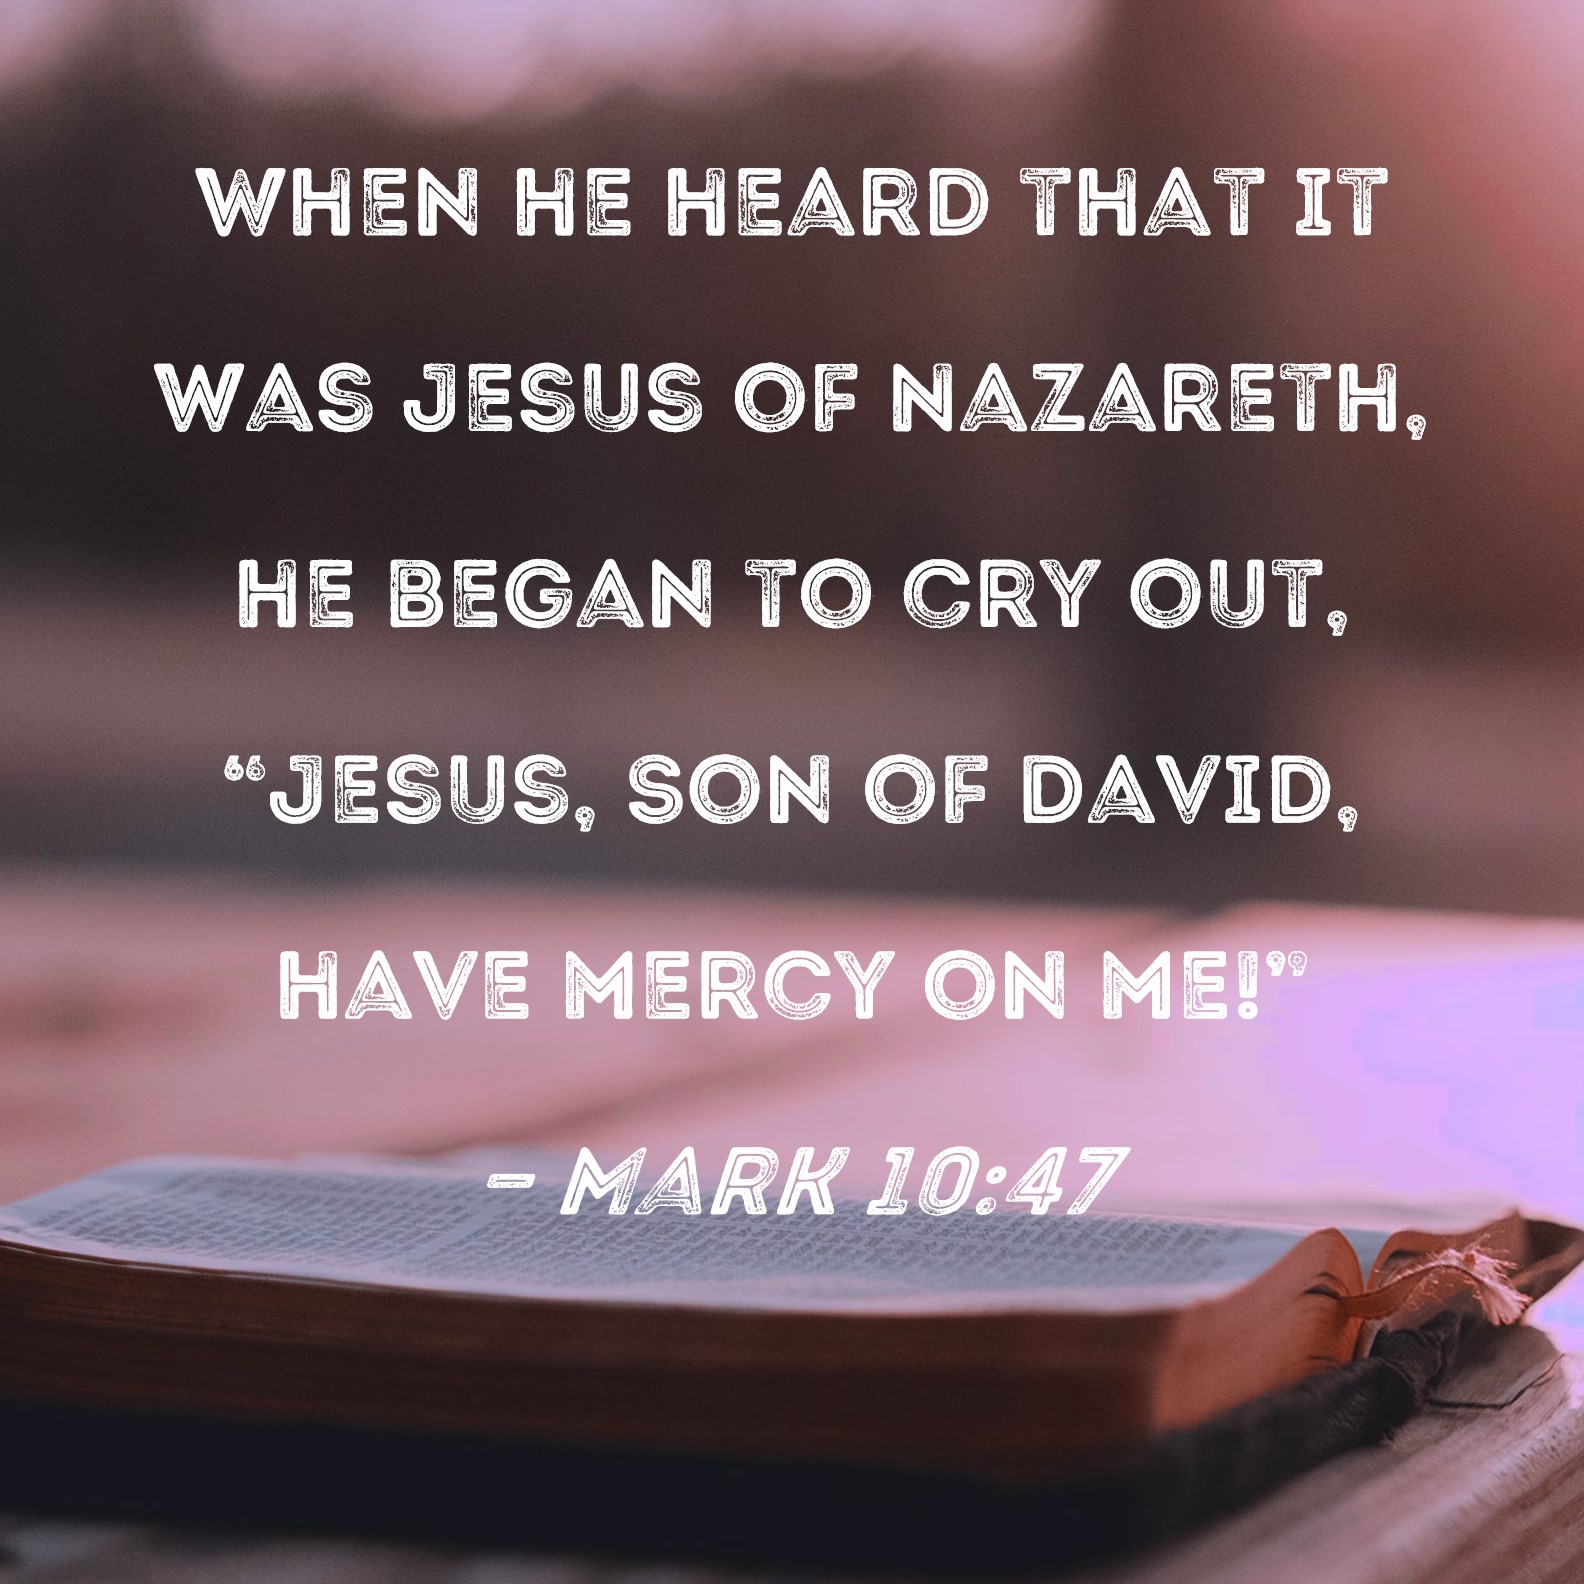 Mark 10:47 When he heard that it was Jesus of Nazareth, he began to cry  out, "Jesus, Son of David, have mercy on me!"